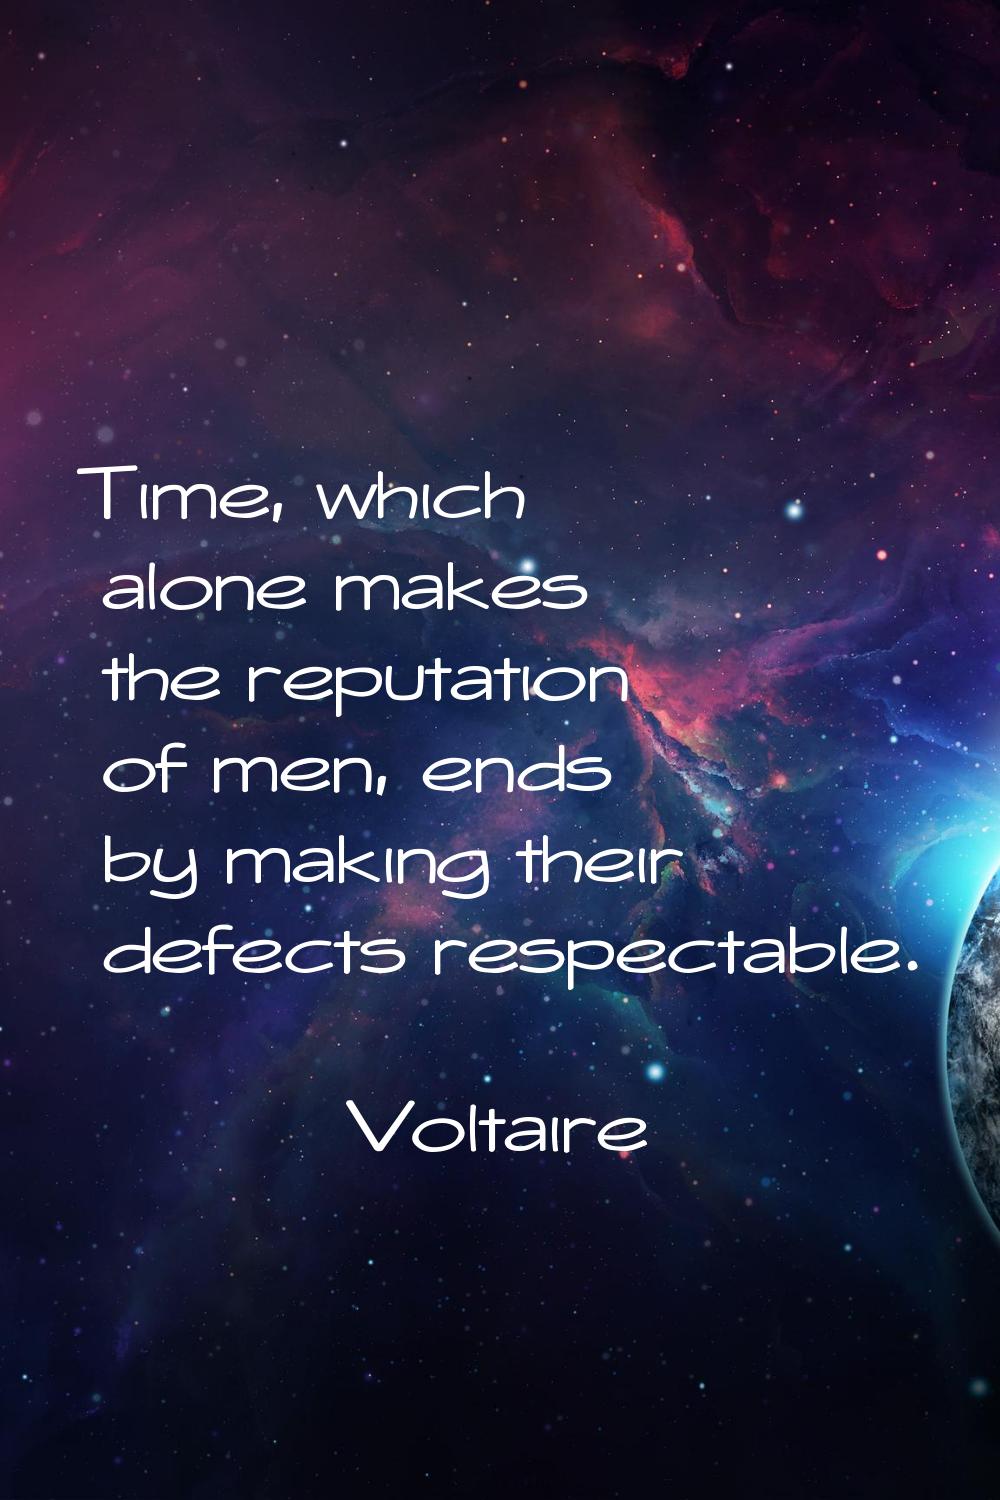 Time, which alone makes the reputation of men, ends by making their defects respectable.